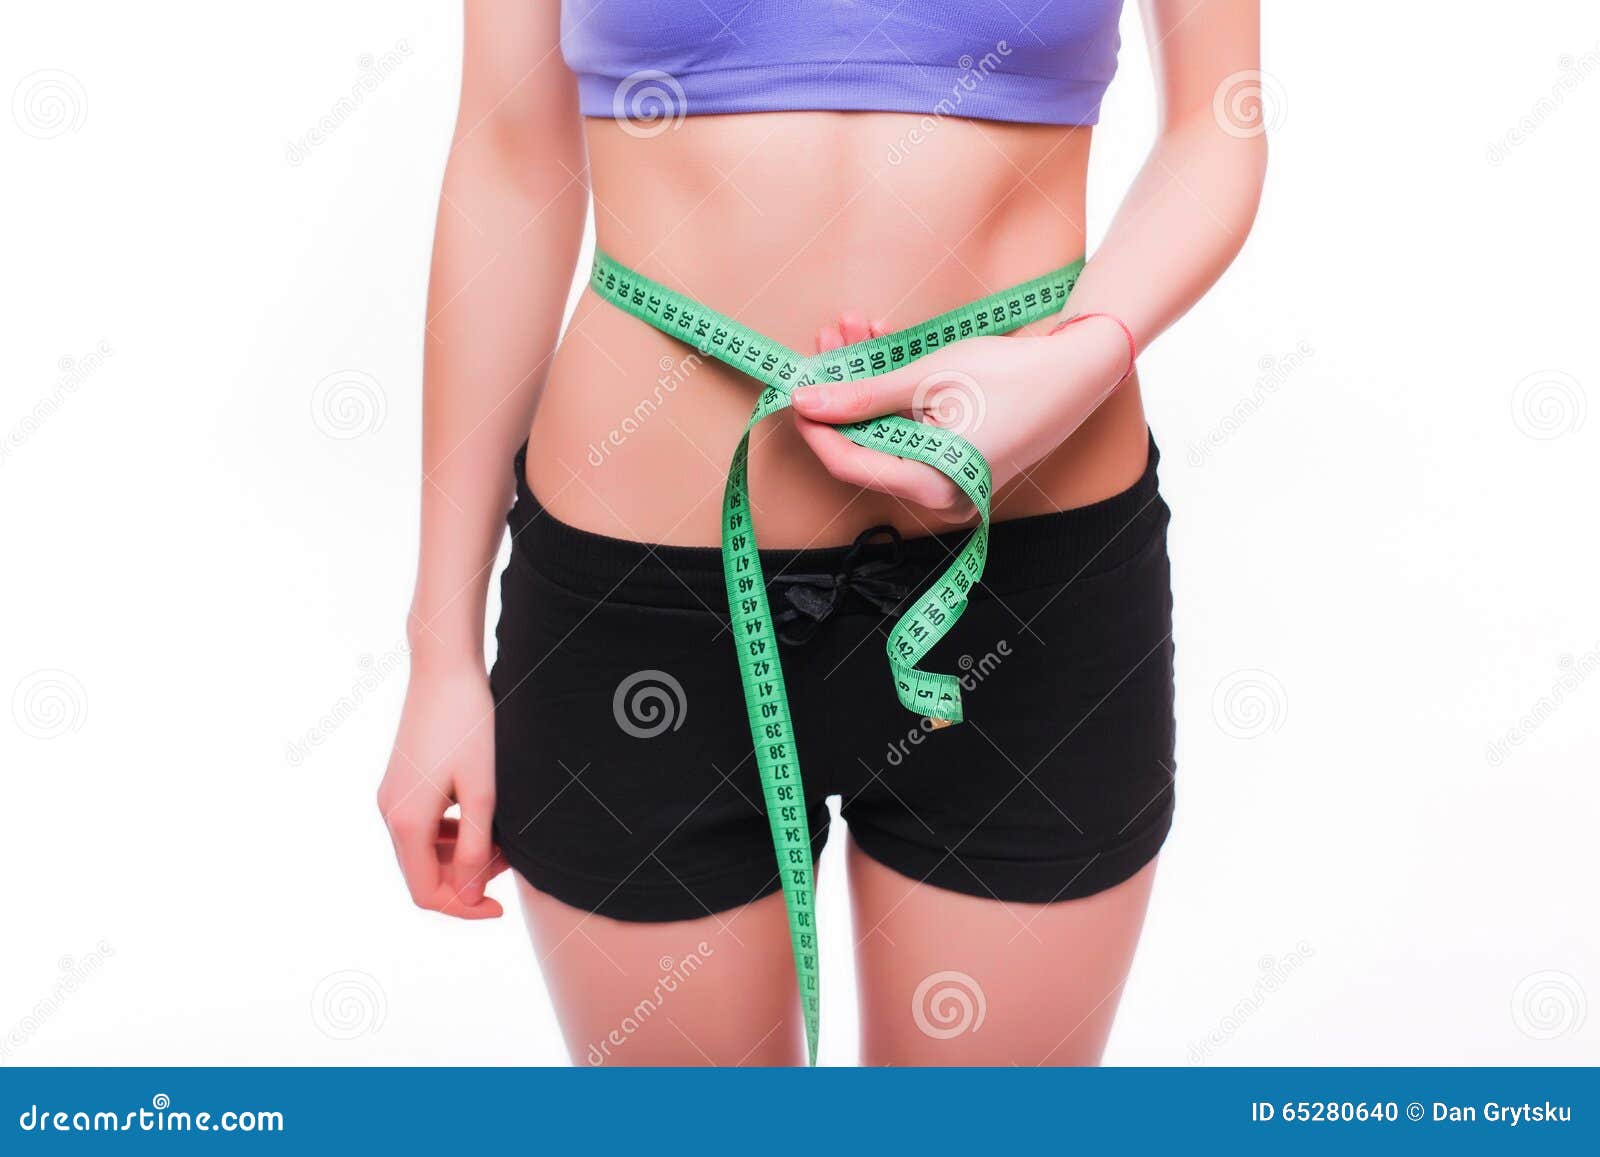 https://thumbs.dreamstime.com/z/woman-measuring-her-thin-waist-tape-measure-close-up-slim-young-65280640.jpg